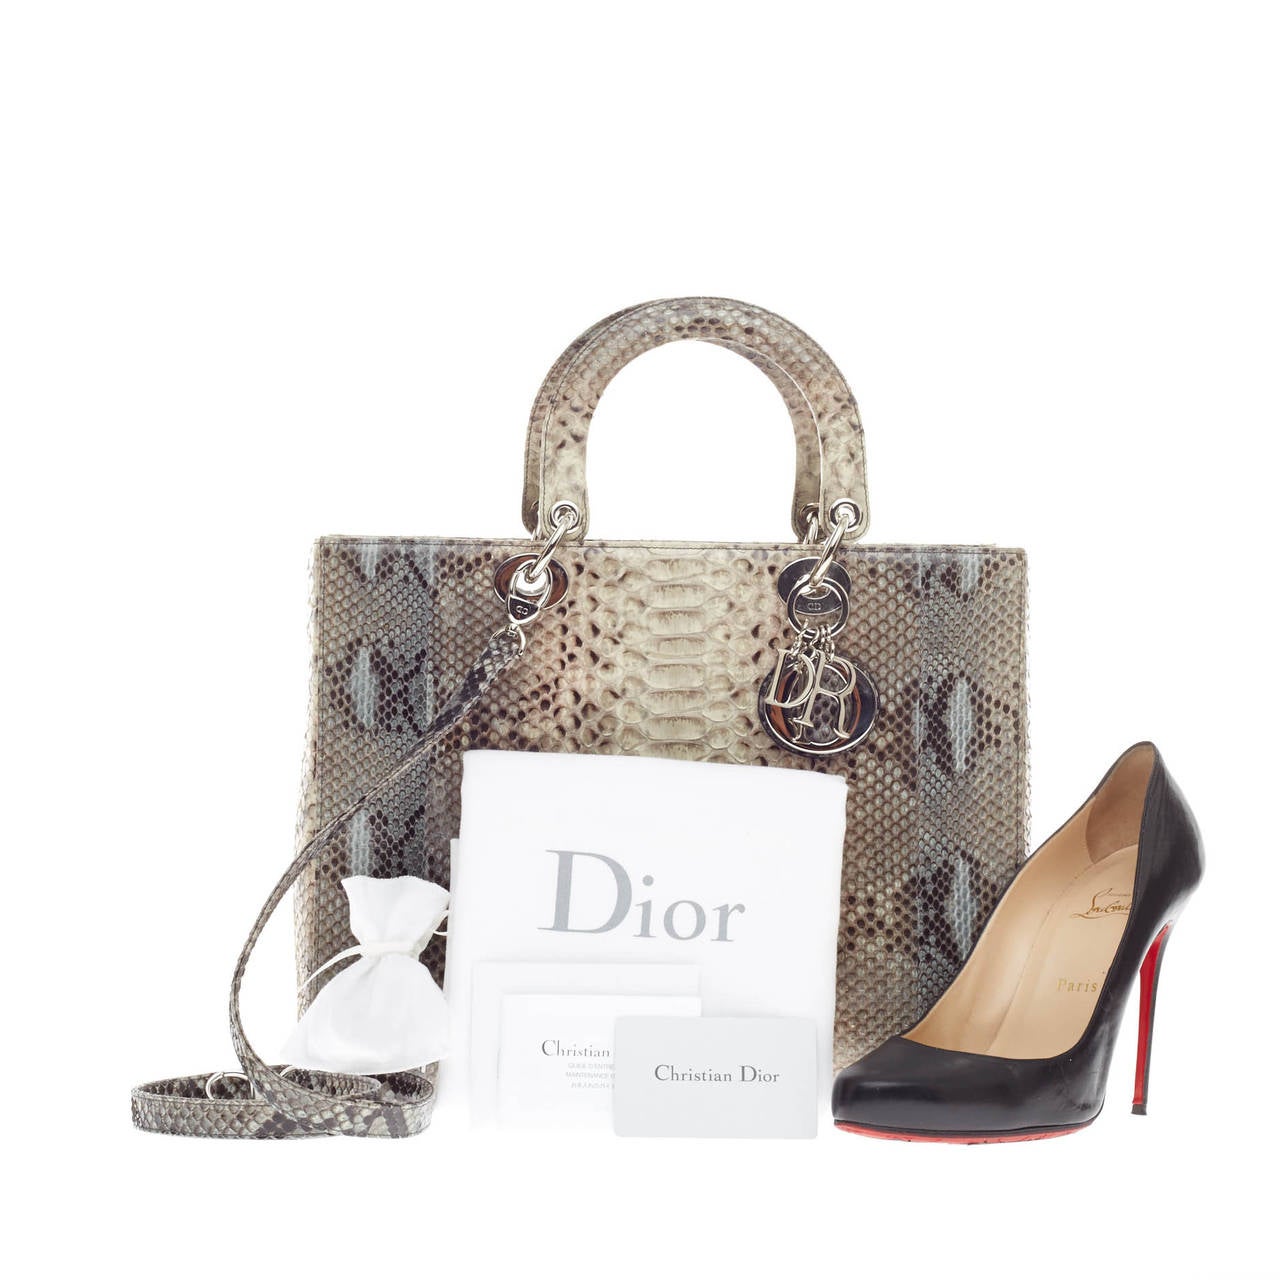 This authentic limited edition Christian Dior Lady Dior Python Large is an elegant and eye-catching piece made for the most daring of fashionistas. Crafted in genuine natural python skin in shaded blue and gray python with hints of pink, this boxy,